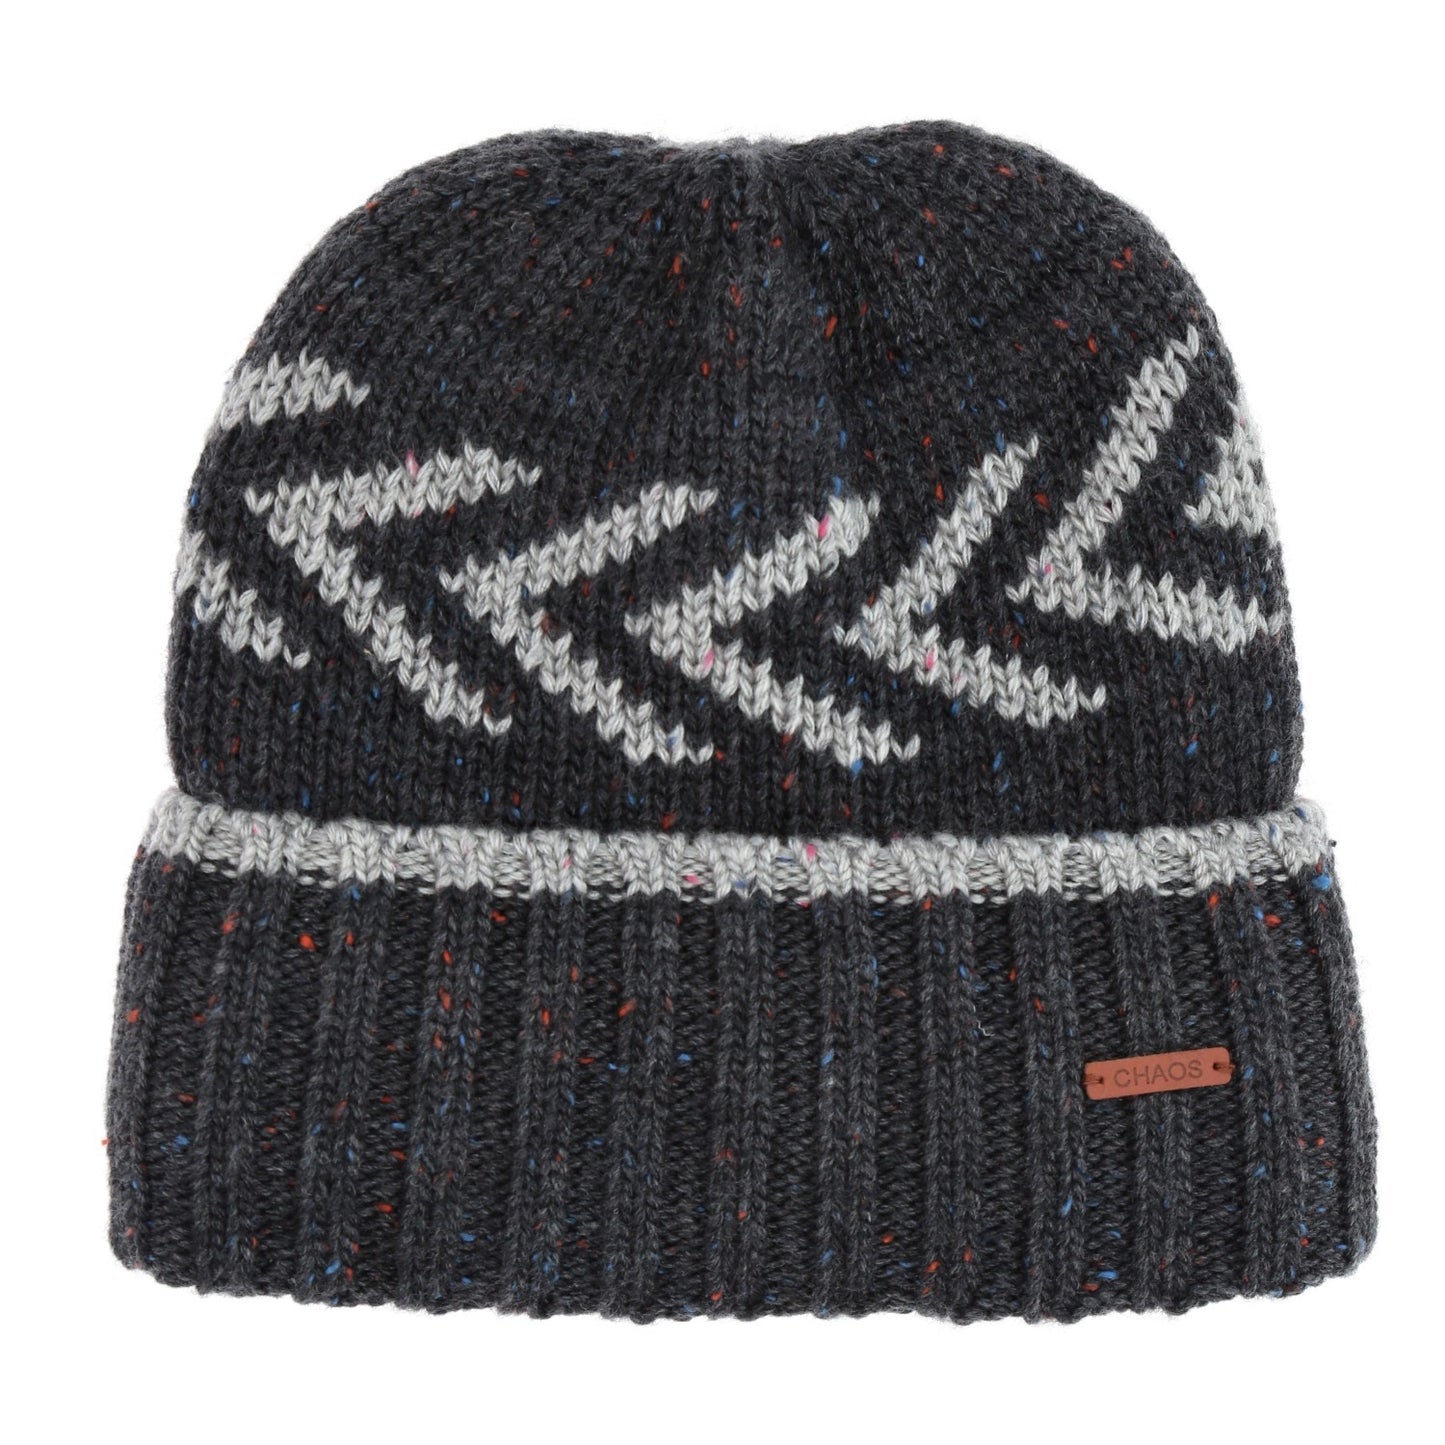 Connect Beanie Style: 232571